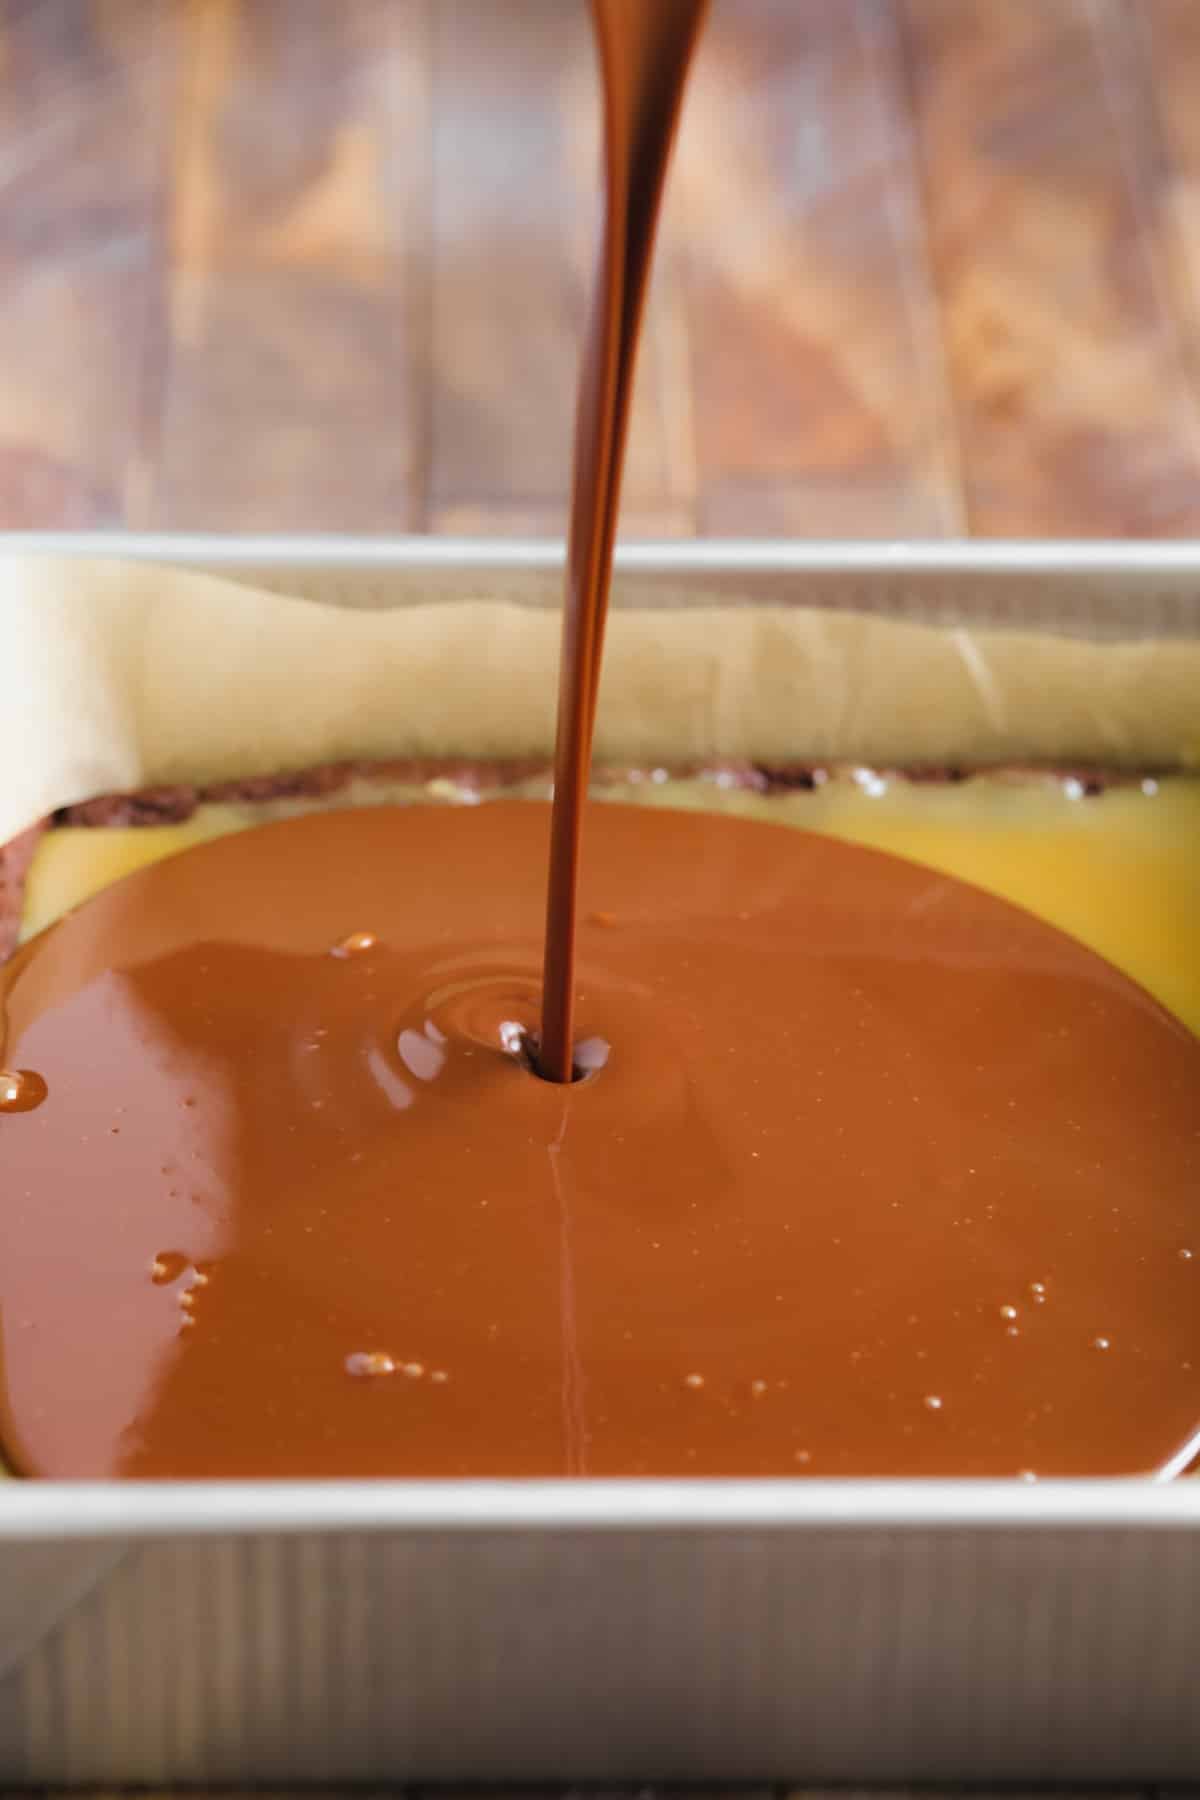 chocolate being poured on top of a caramel layer in a pan.